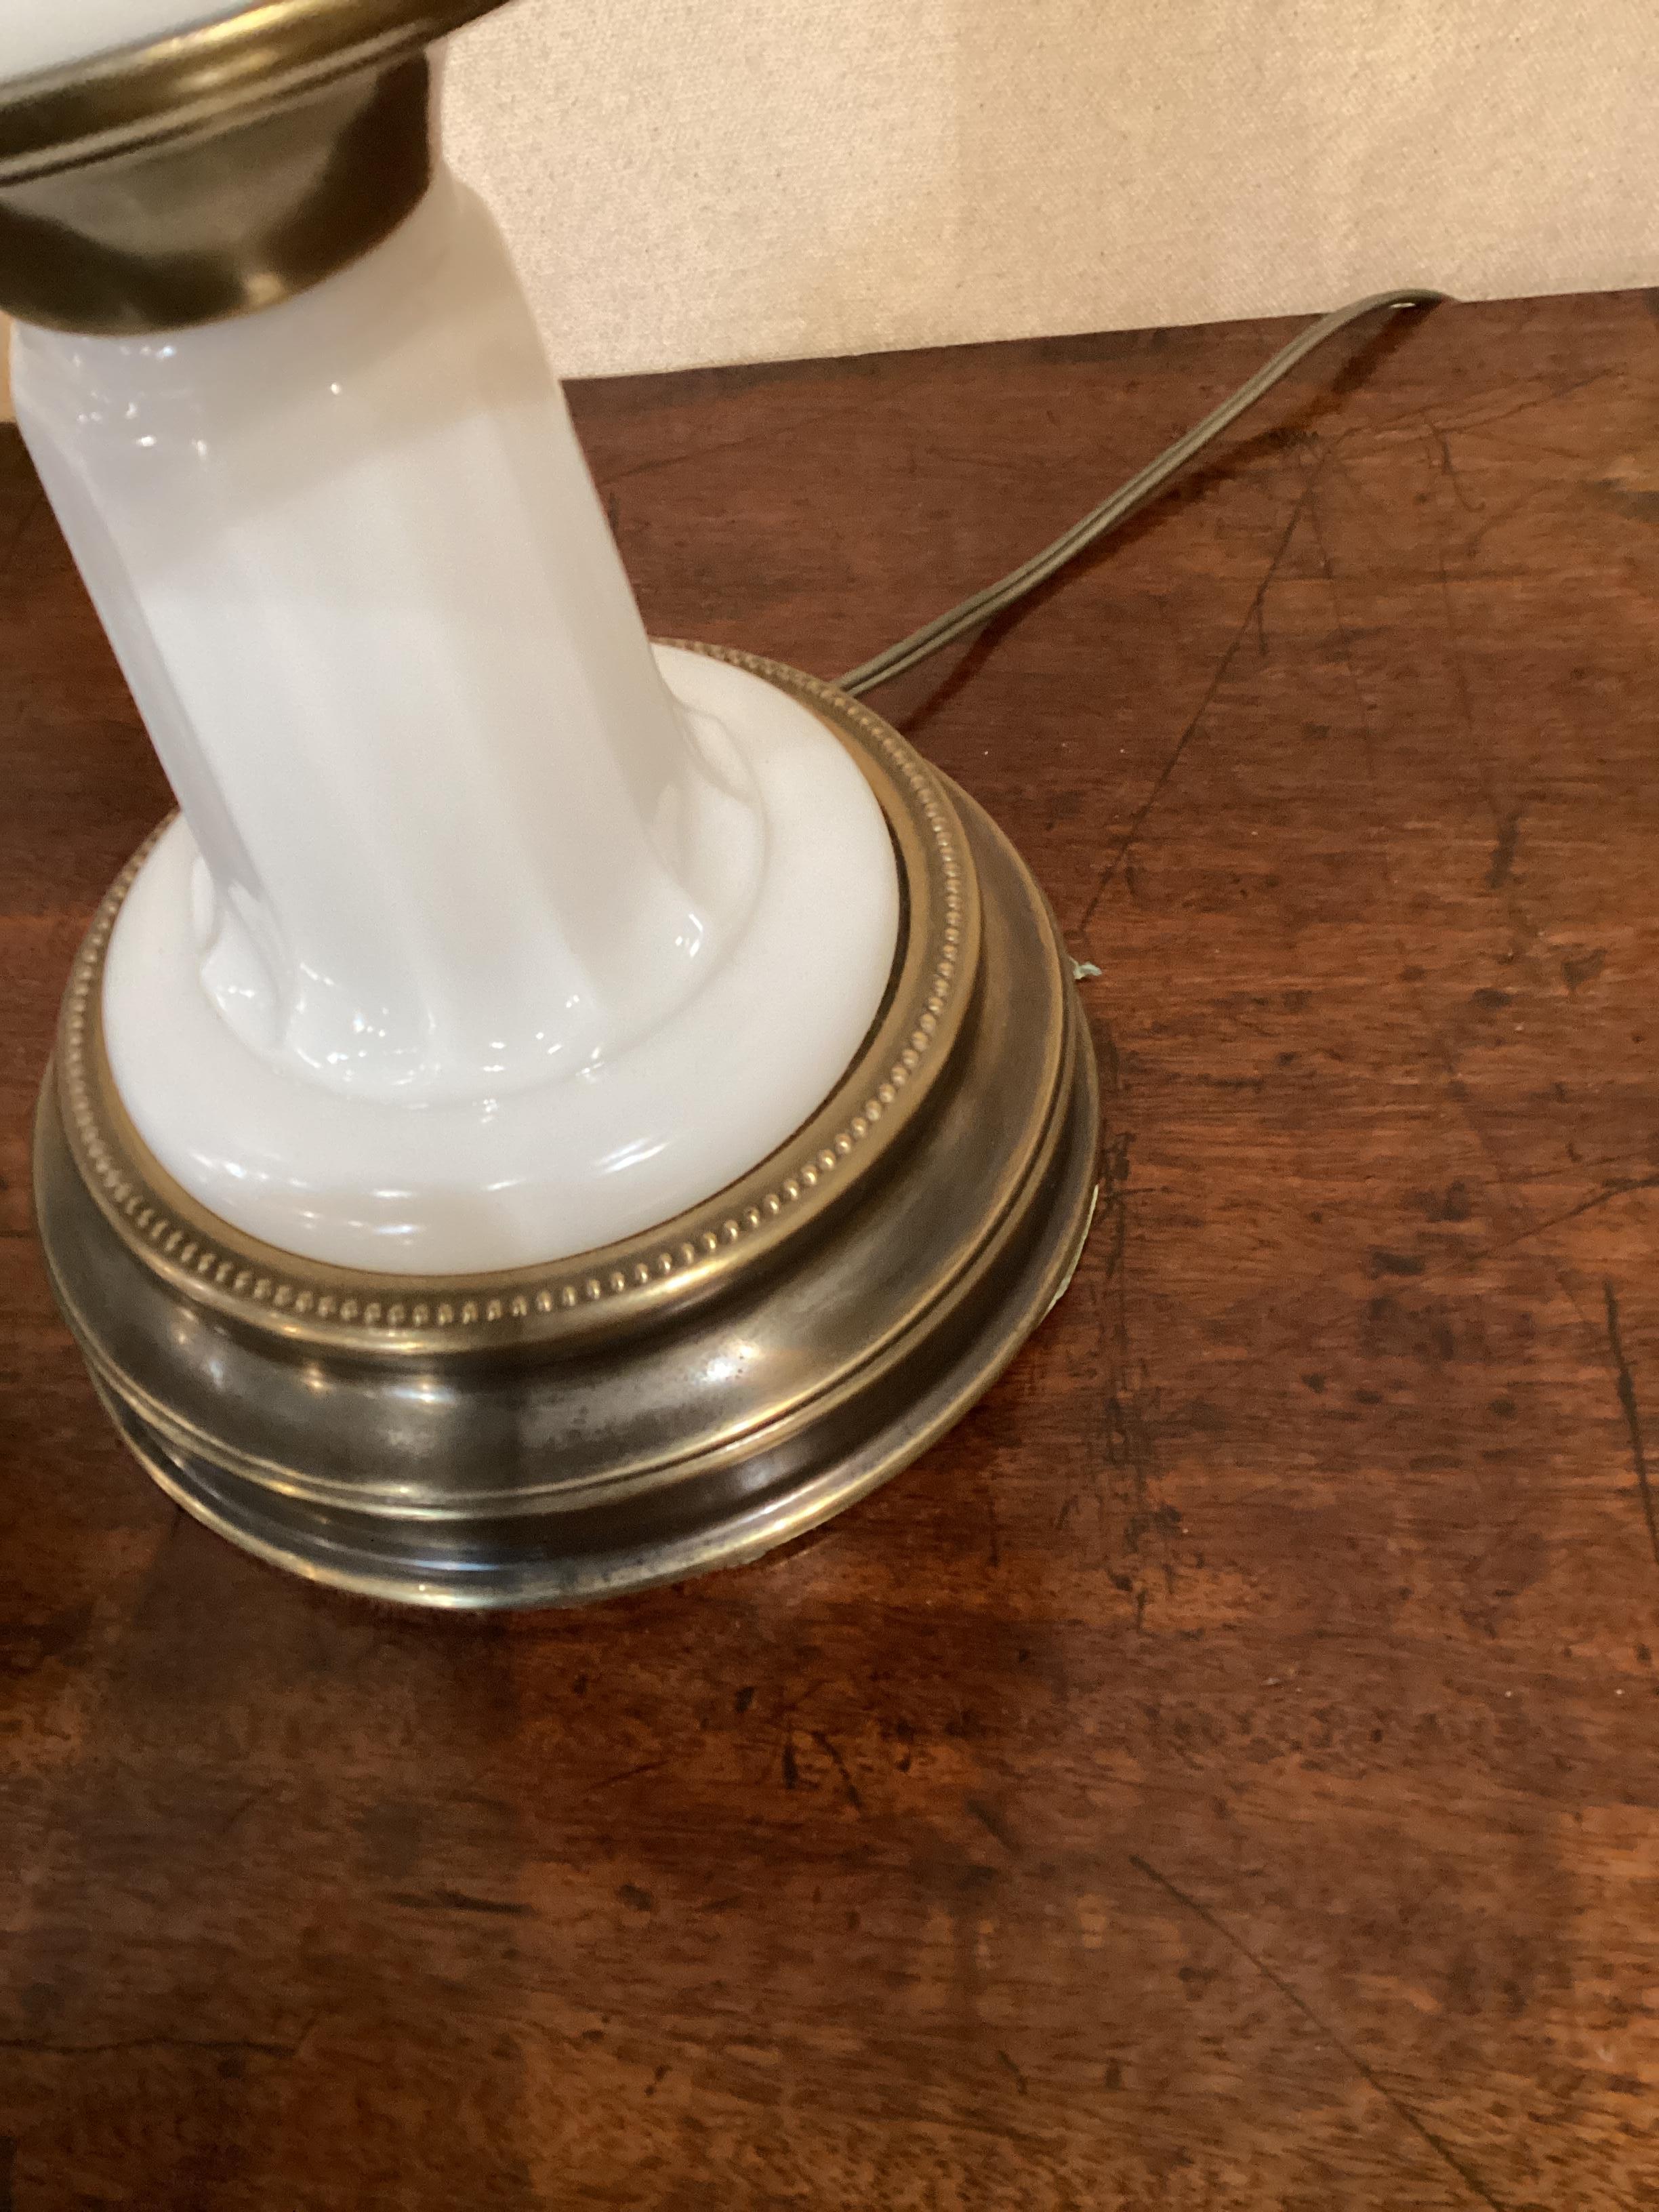 Pair of Mid Century Paul Hanson White Opaline Lamps. These lamps were made by Paul Hanson in the 50/60s after earlier examples of 19th Century oil lamps. They are wired and in working condition. They measure 24” to the bottom of the harp.